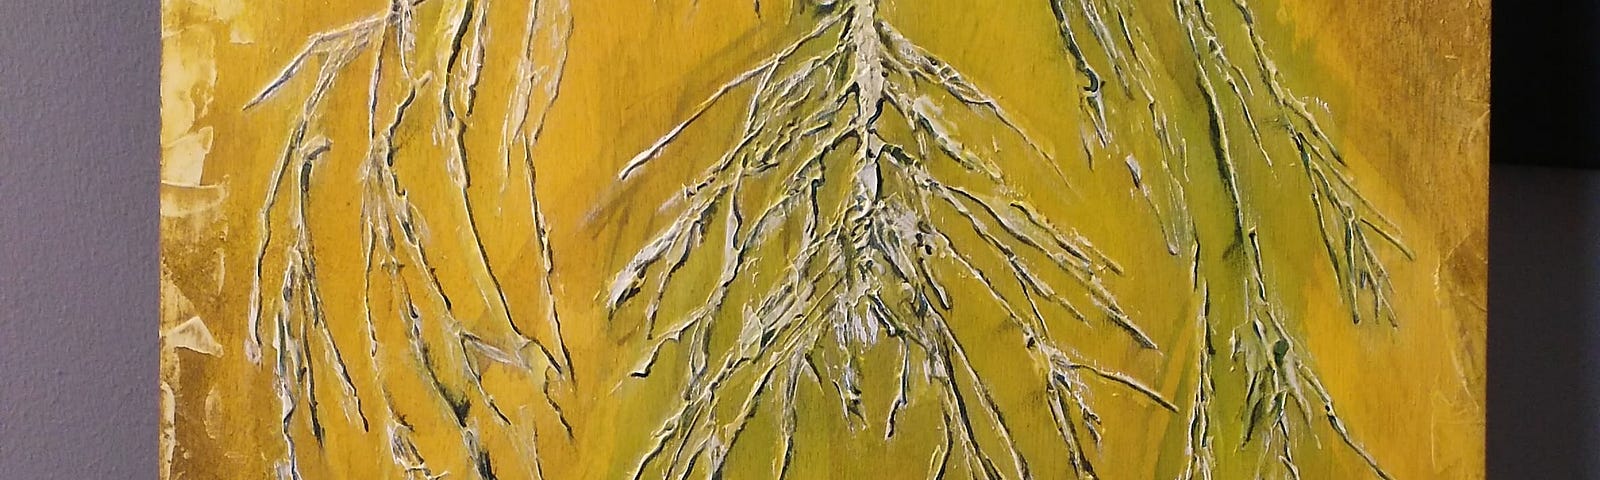 painting depicting a human nervous system